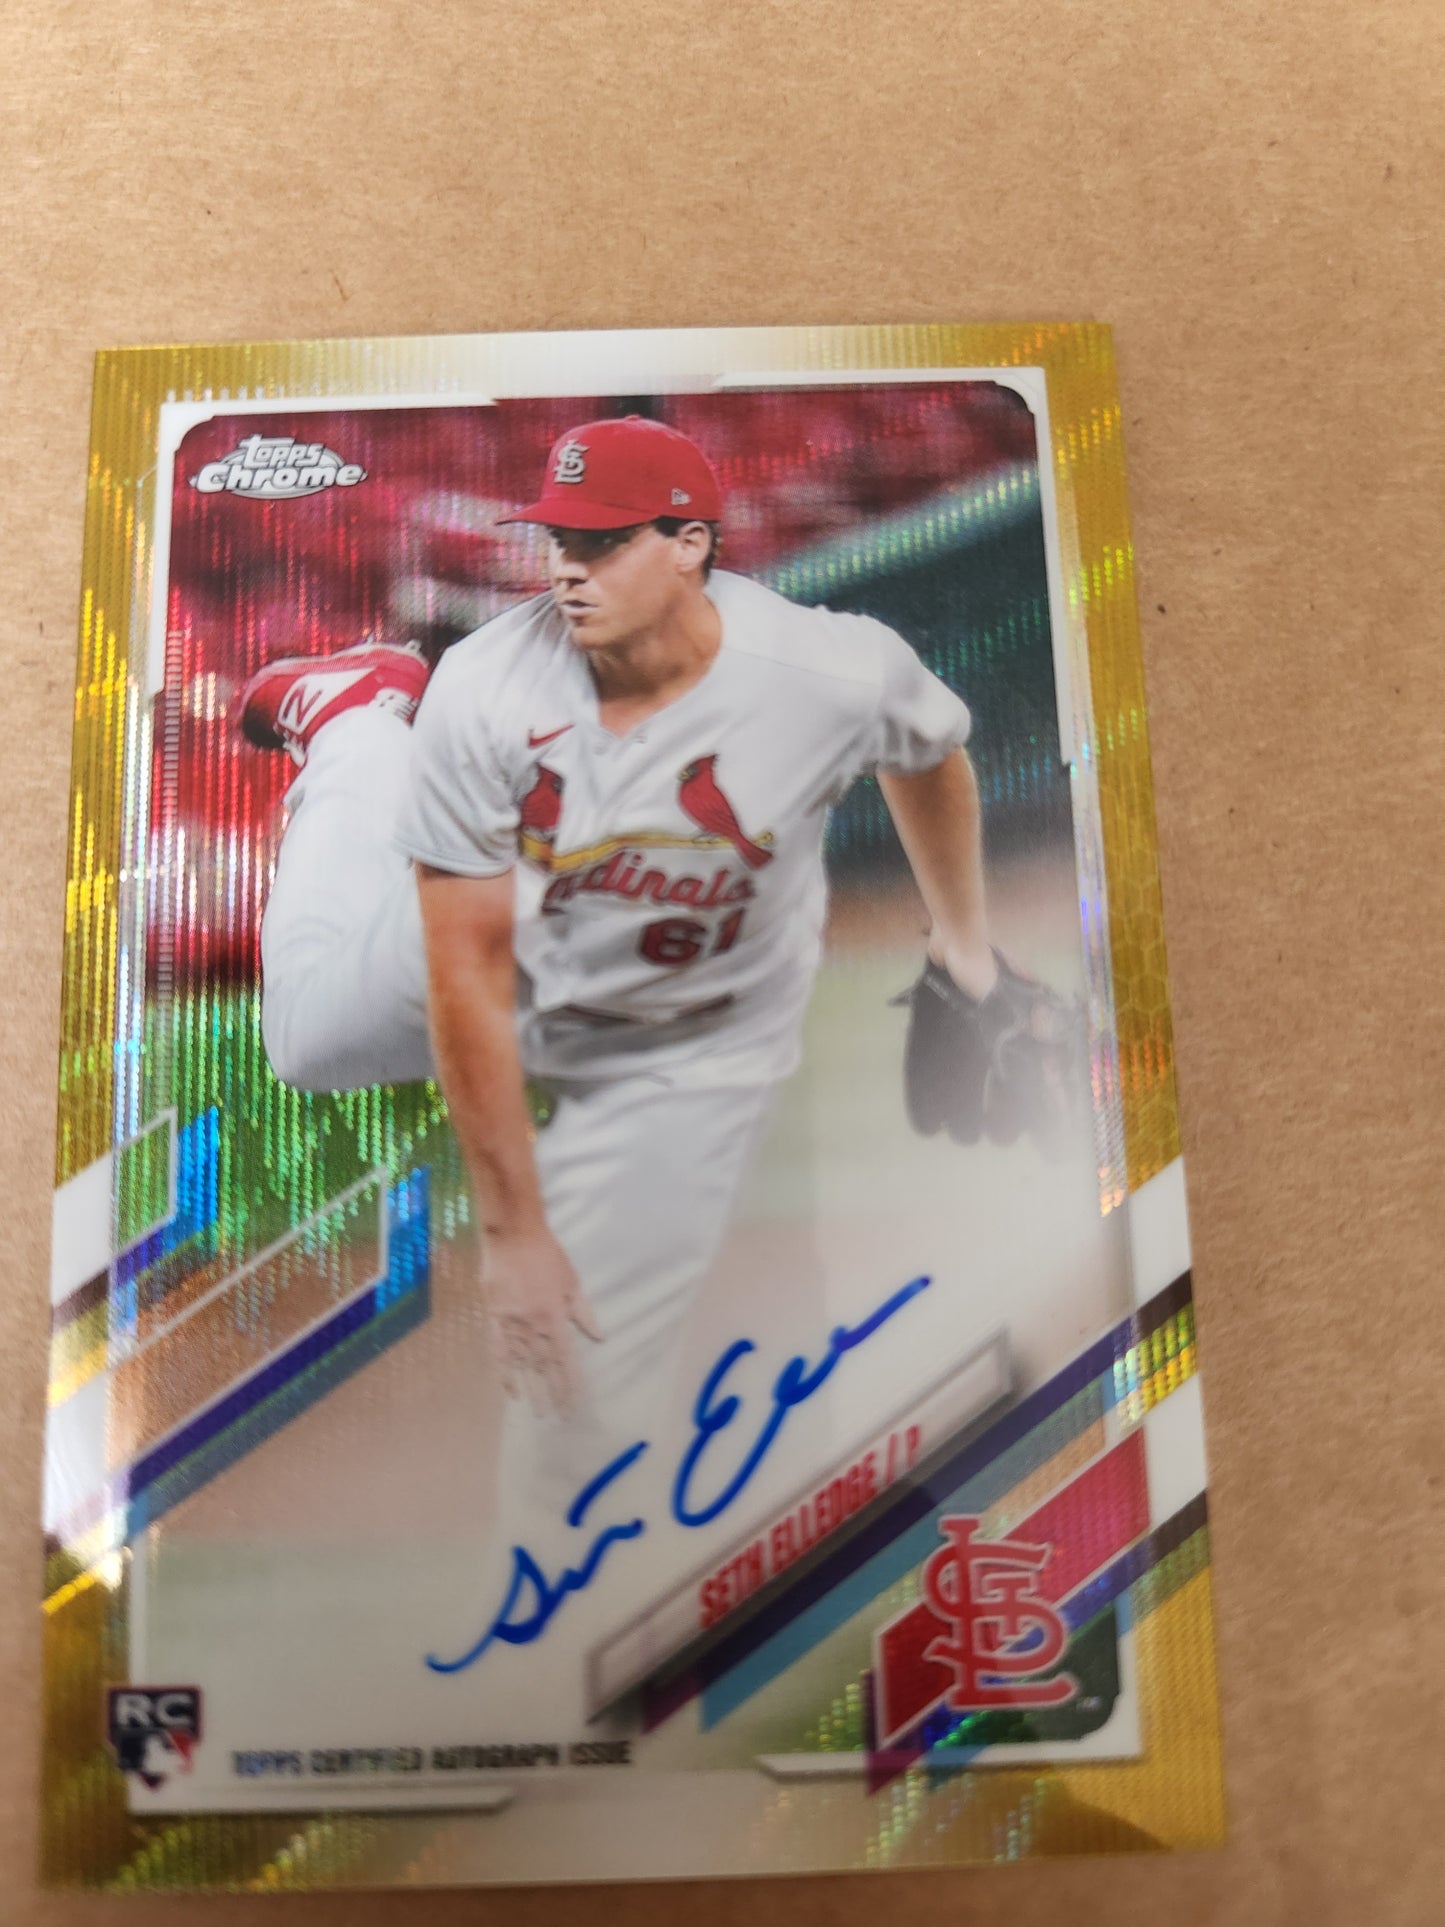 2021 Topps Chrome Gold Refractor 41/50 Rookie Auto Seth Elledge Cardinals RA SEL